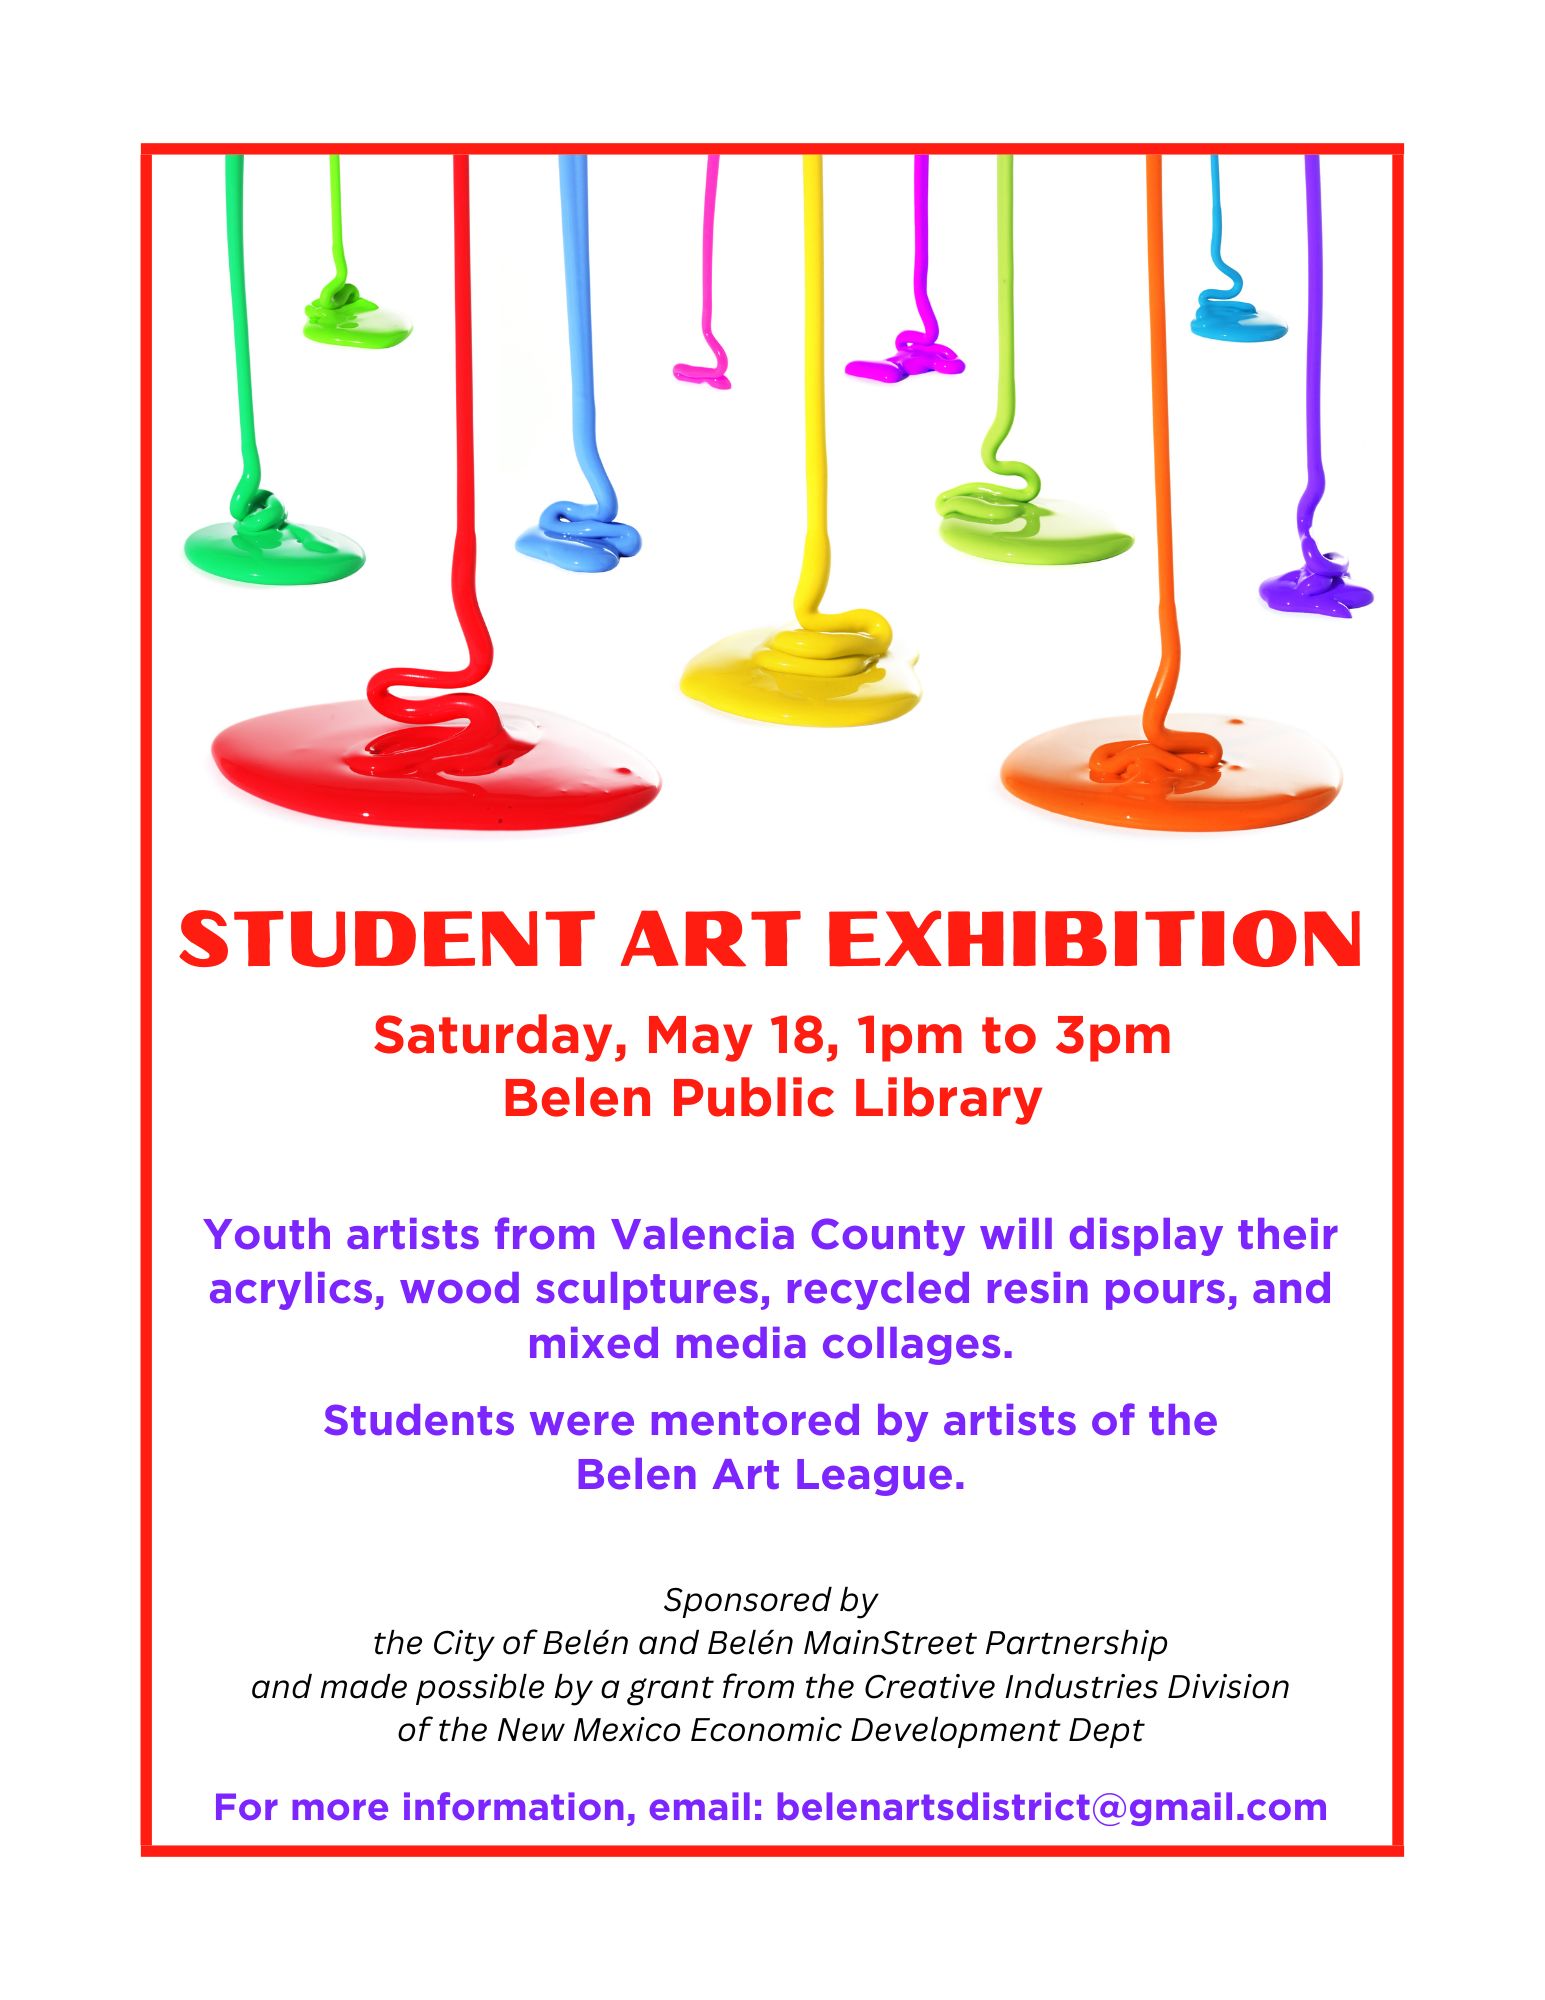 Featured image for “Student Art Exhibition”